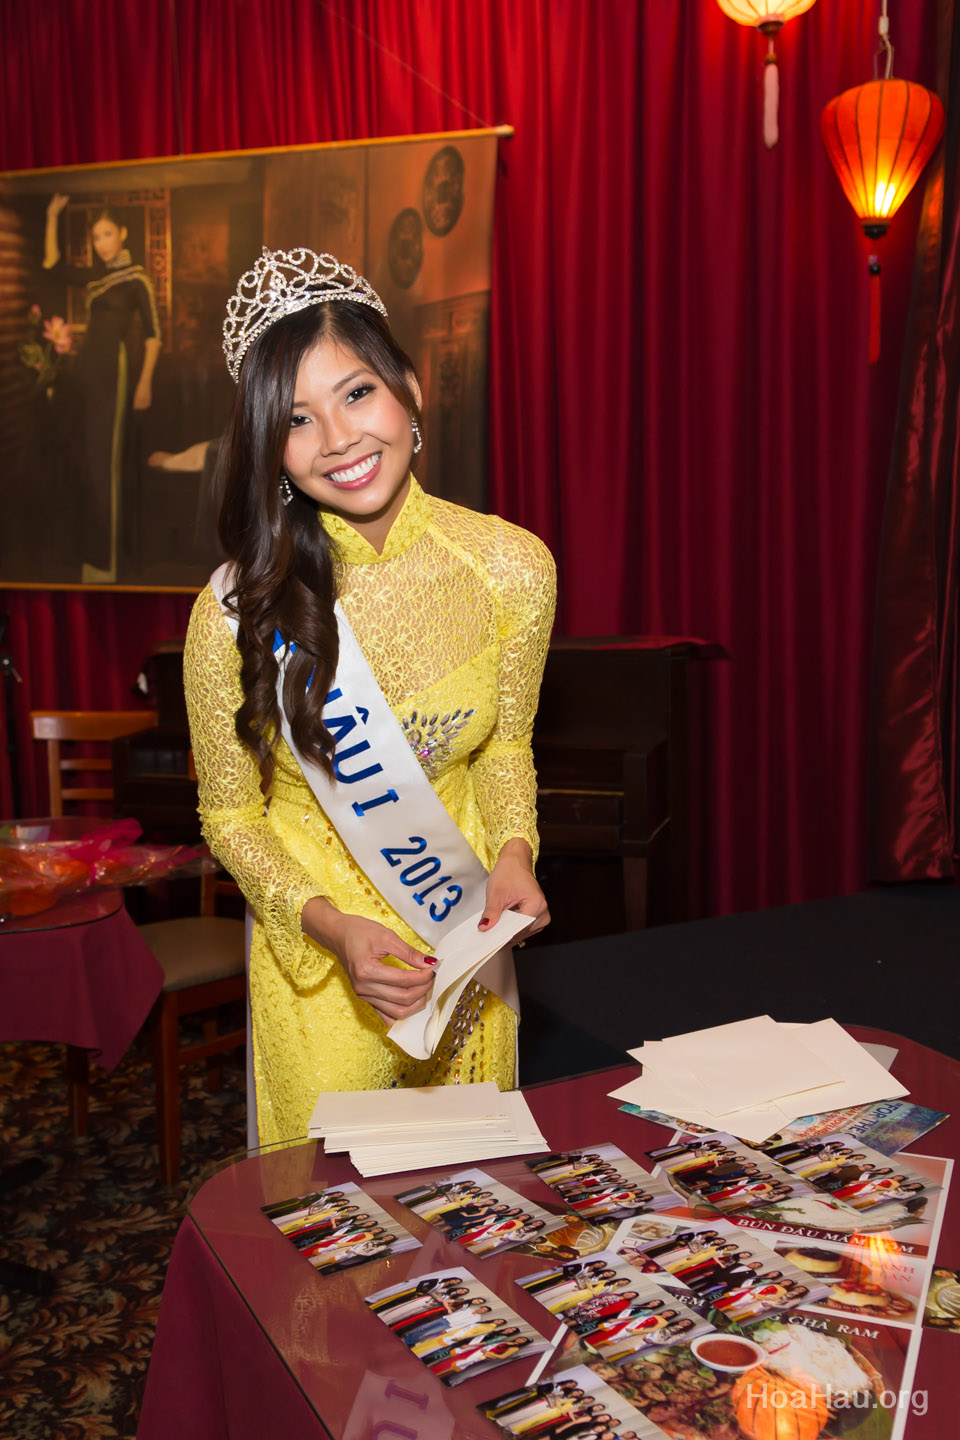 Charity Fundraiser - For the Children 2013 - Paloma, San Jose, CA - Image 43